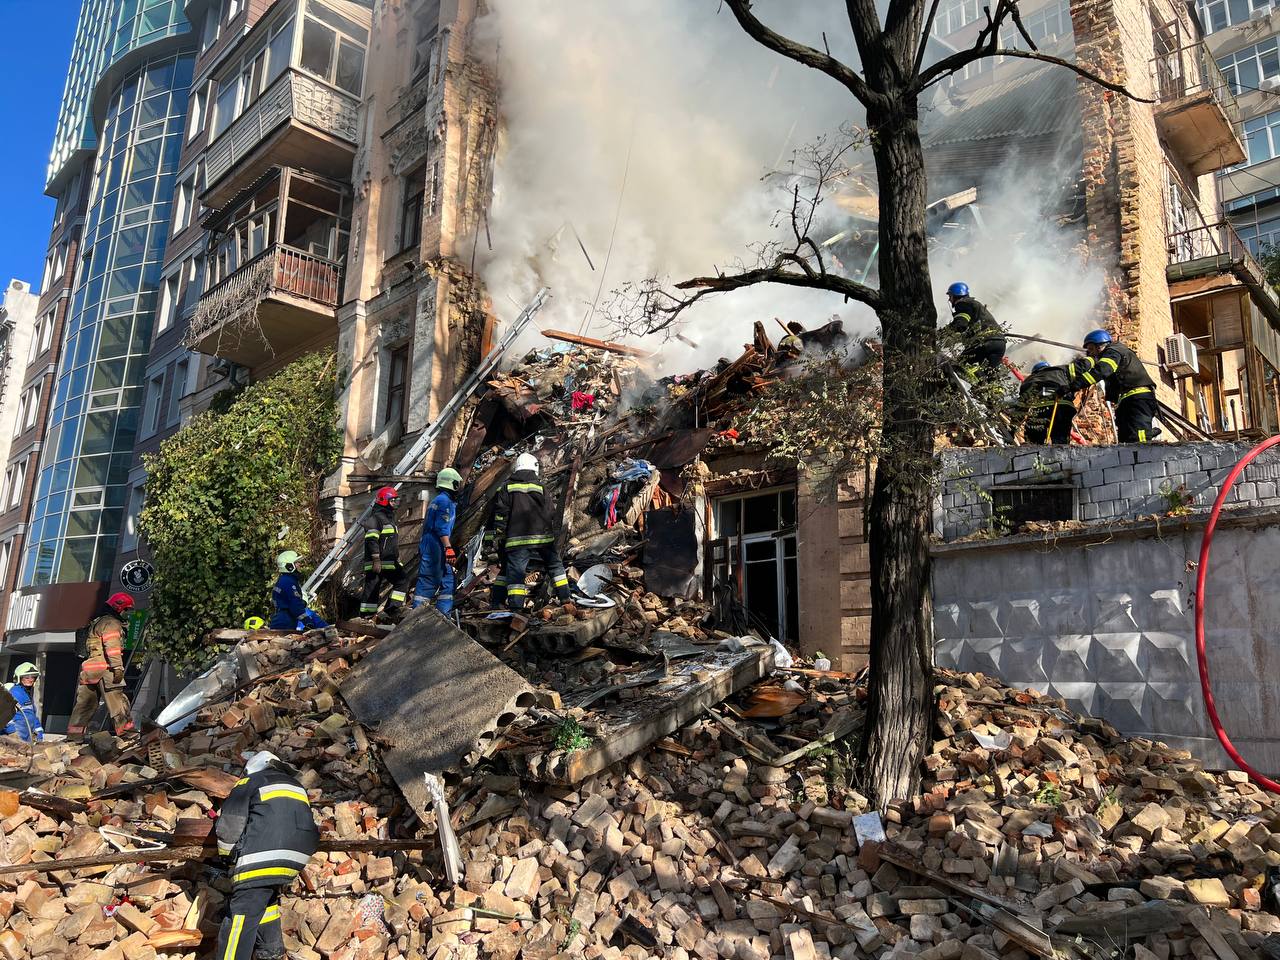 October 17, 2022. A residential building in the center of Kyiv